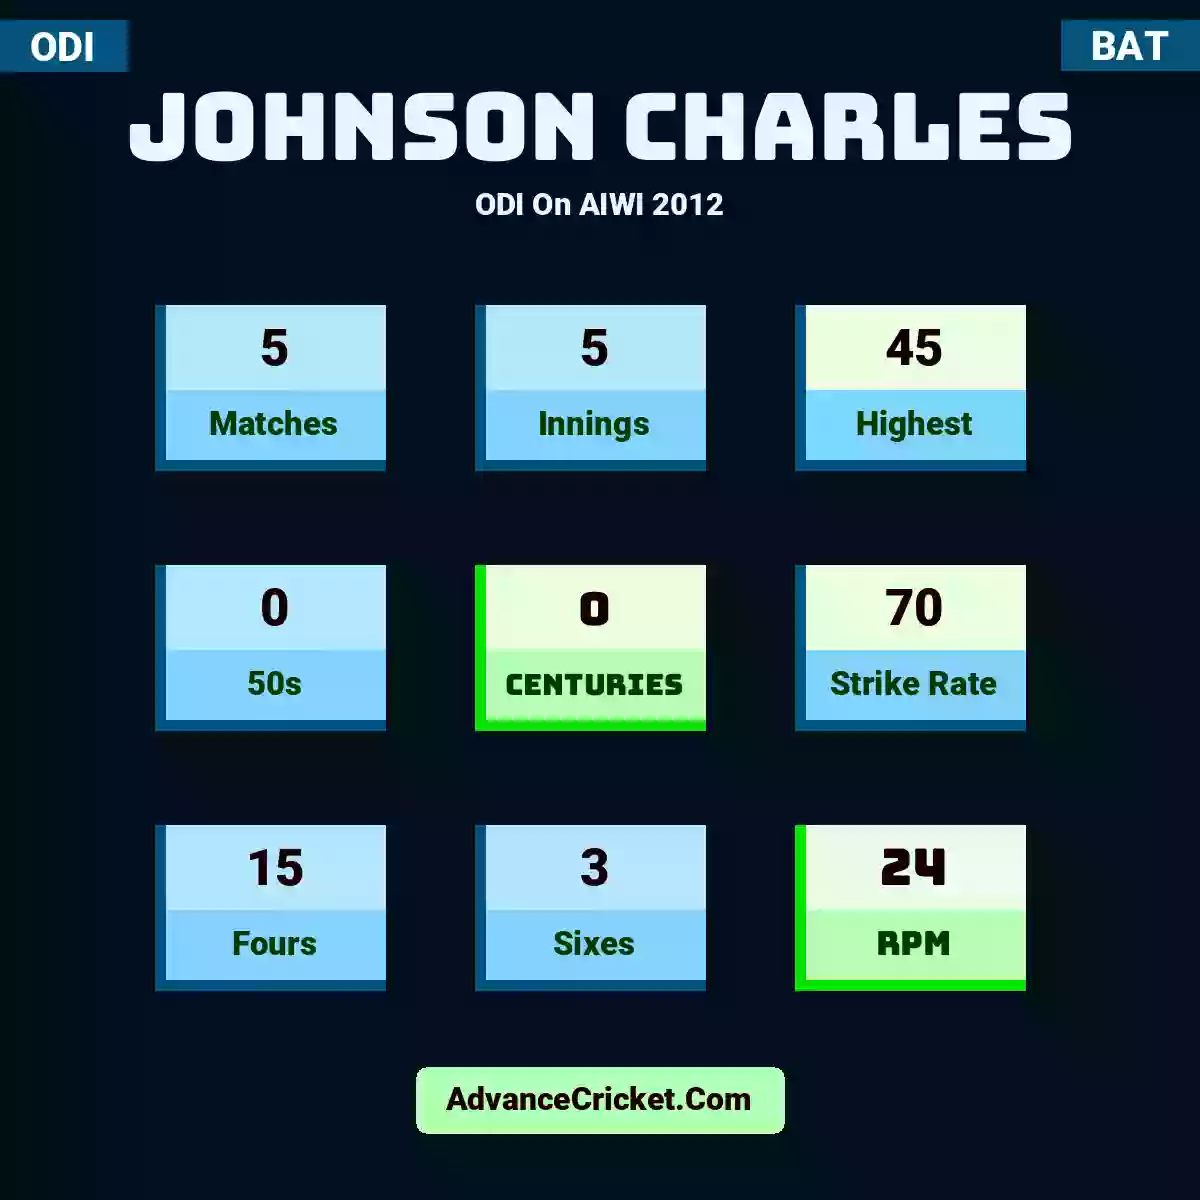 Johnson Charles ODI  On AIWI 2012, Johnson Charles played 5 matches, scored 45 runs as highest, 0 half-centuries, and 0 centuries, with a strike rate of 70. J.Charles hit 15 fours and 3 sixes, with an RPM of 24.